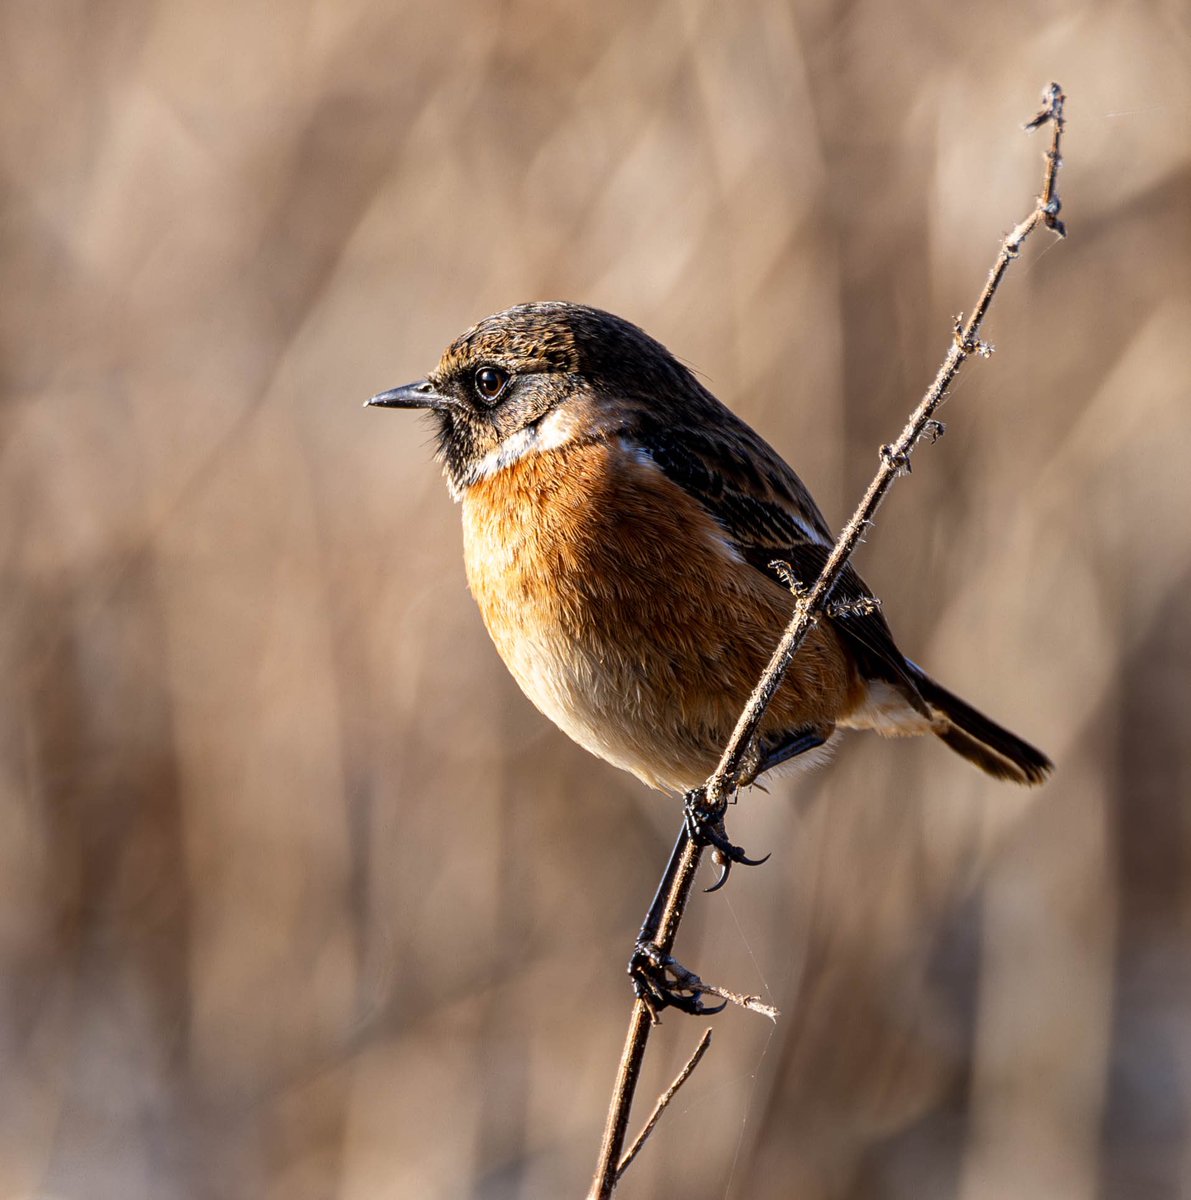 Stonechat at Parkgate today